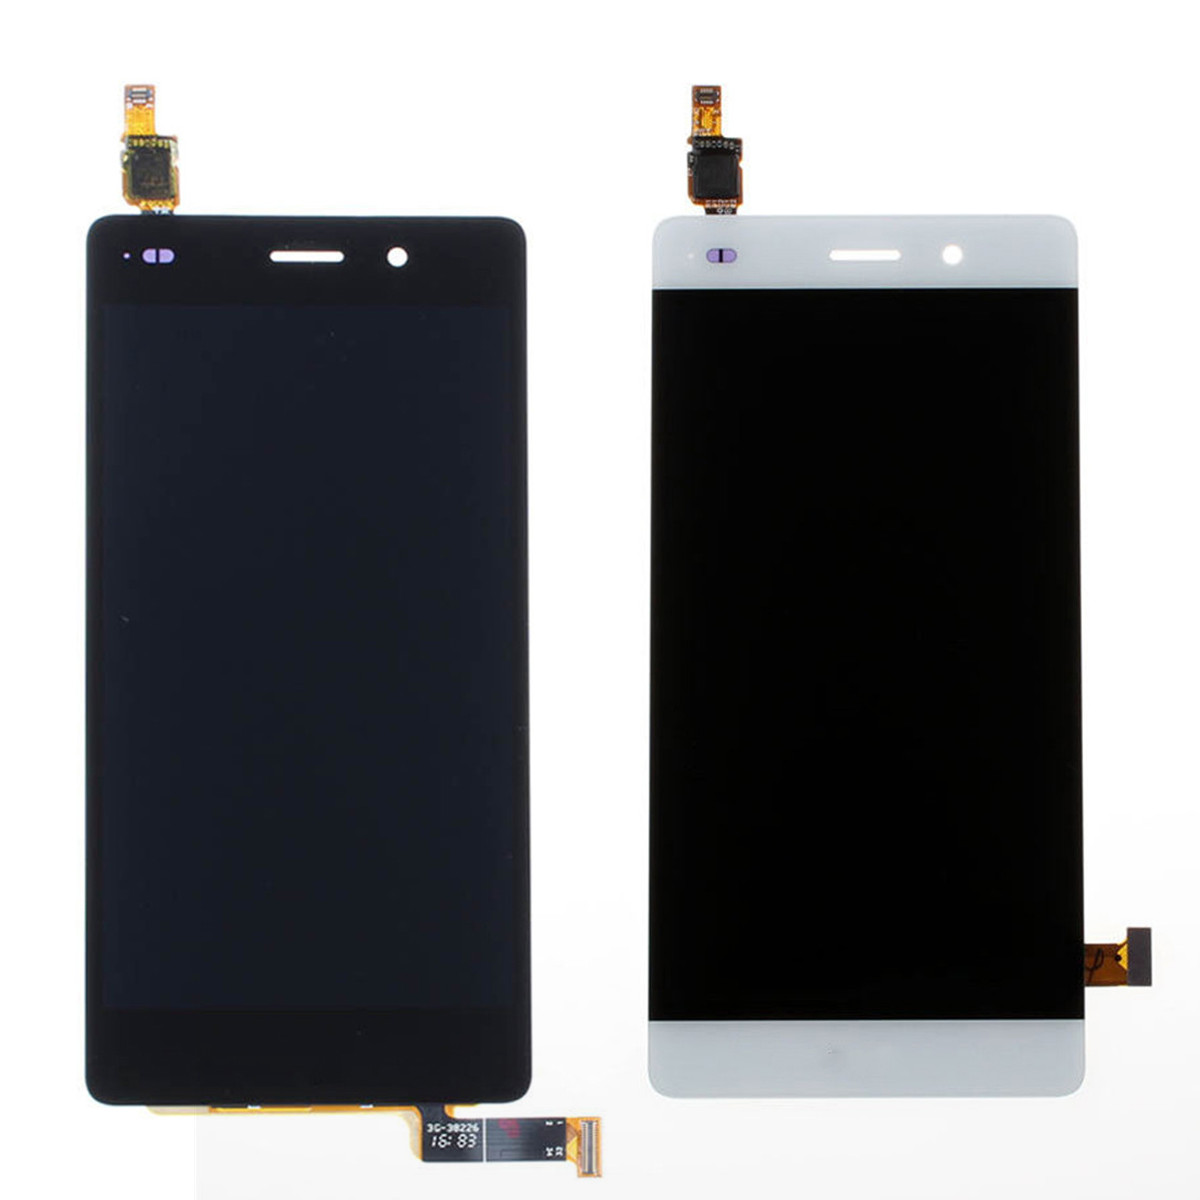 

LCD Display+Touch Screen Digitizer Screen Replacement With Tools For Huawei P8 Lite ALE-L04 L21 2016